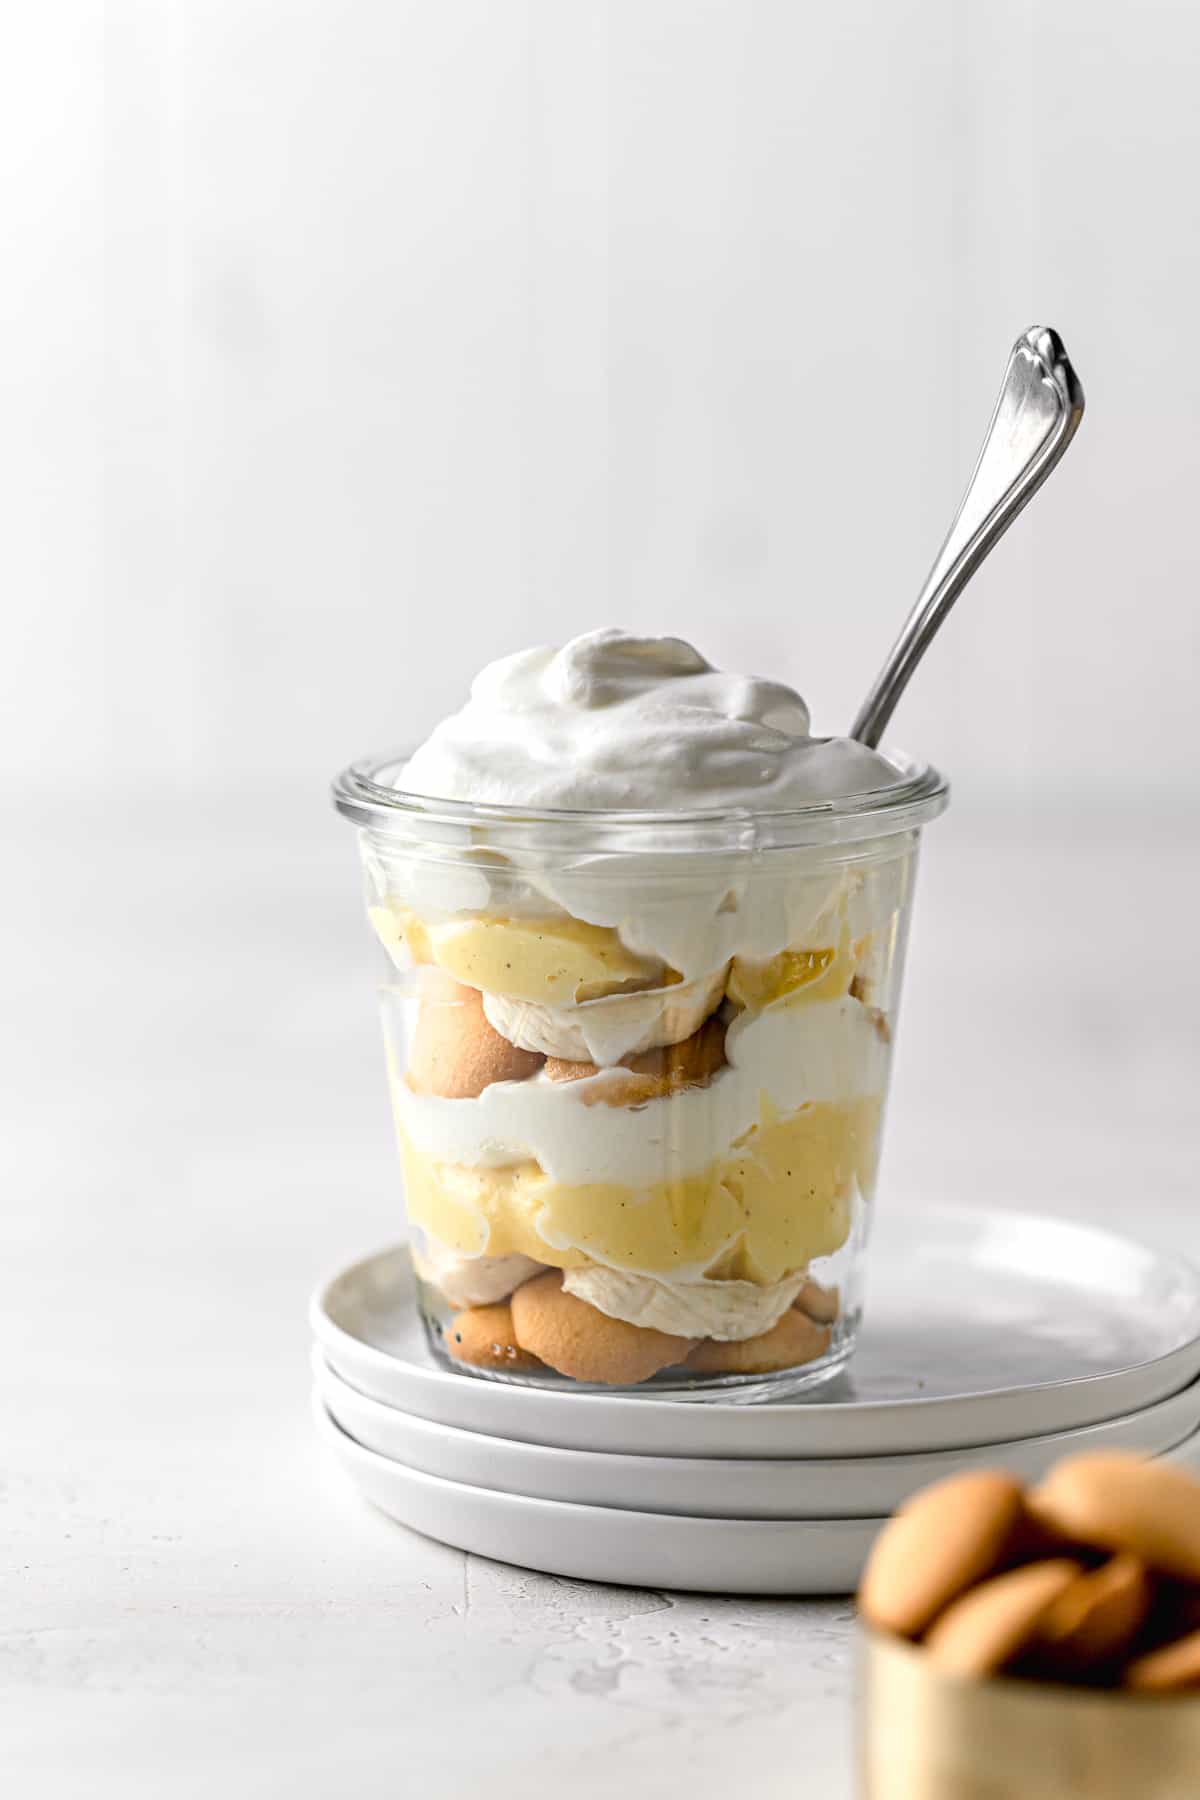 banana pudding jar with spoon on top of stacked plates